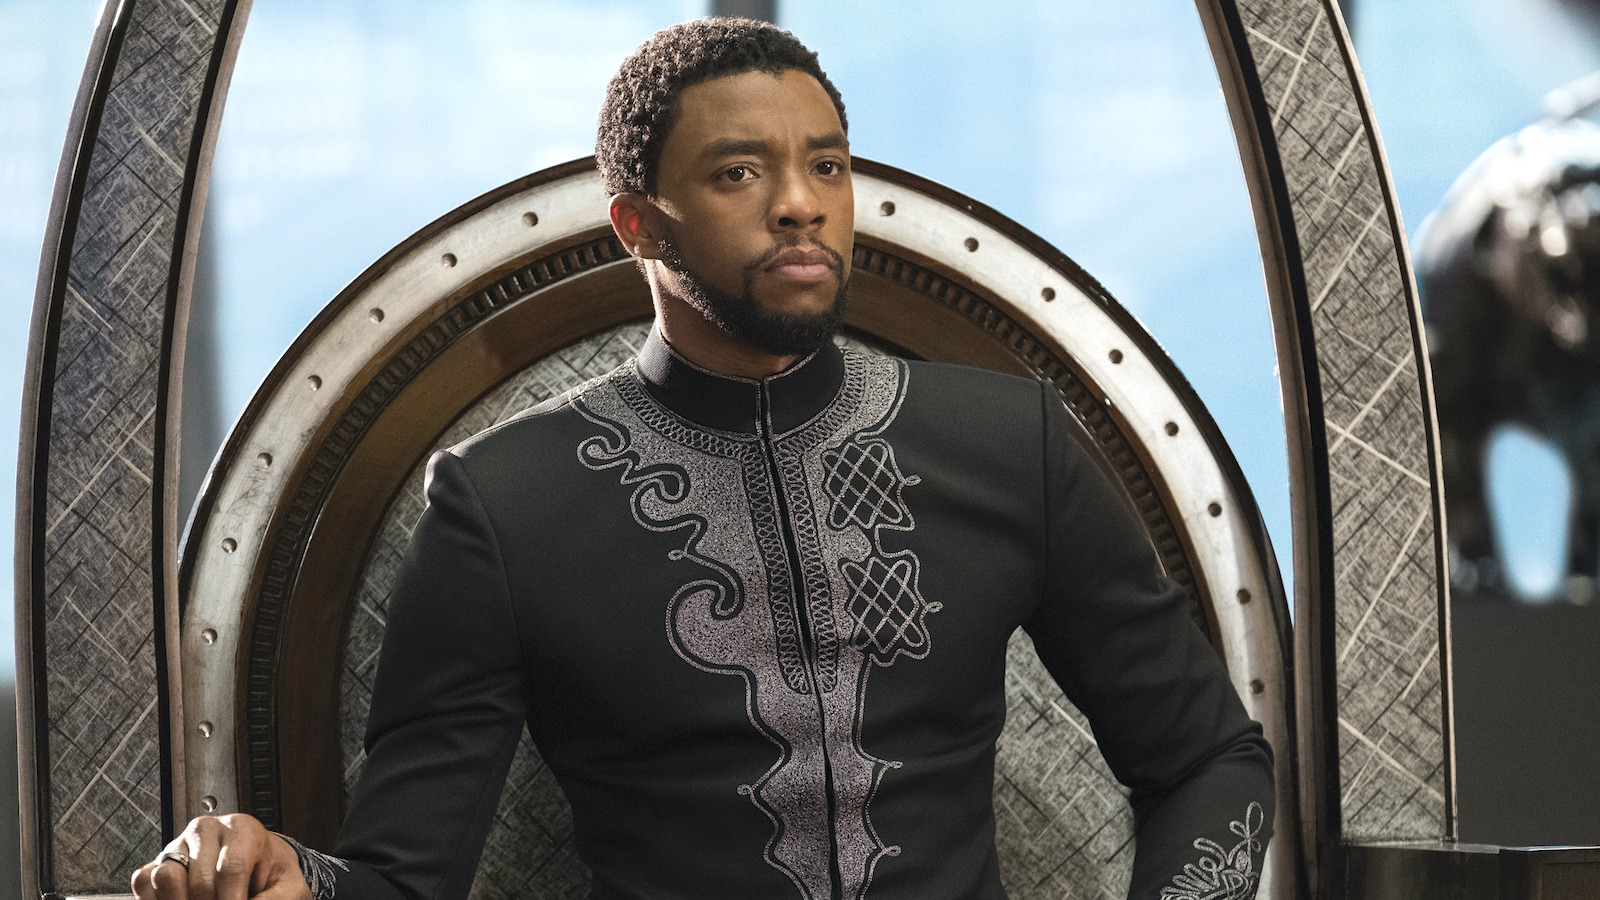 Chadwick Boseman ascends the Wakanda throne as King T'Challa in 'Black Panther'